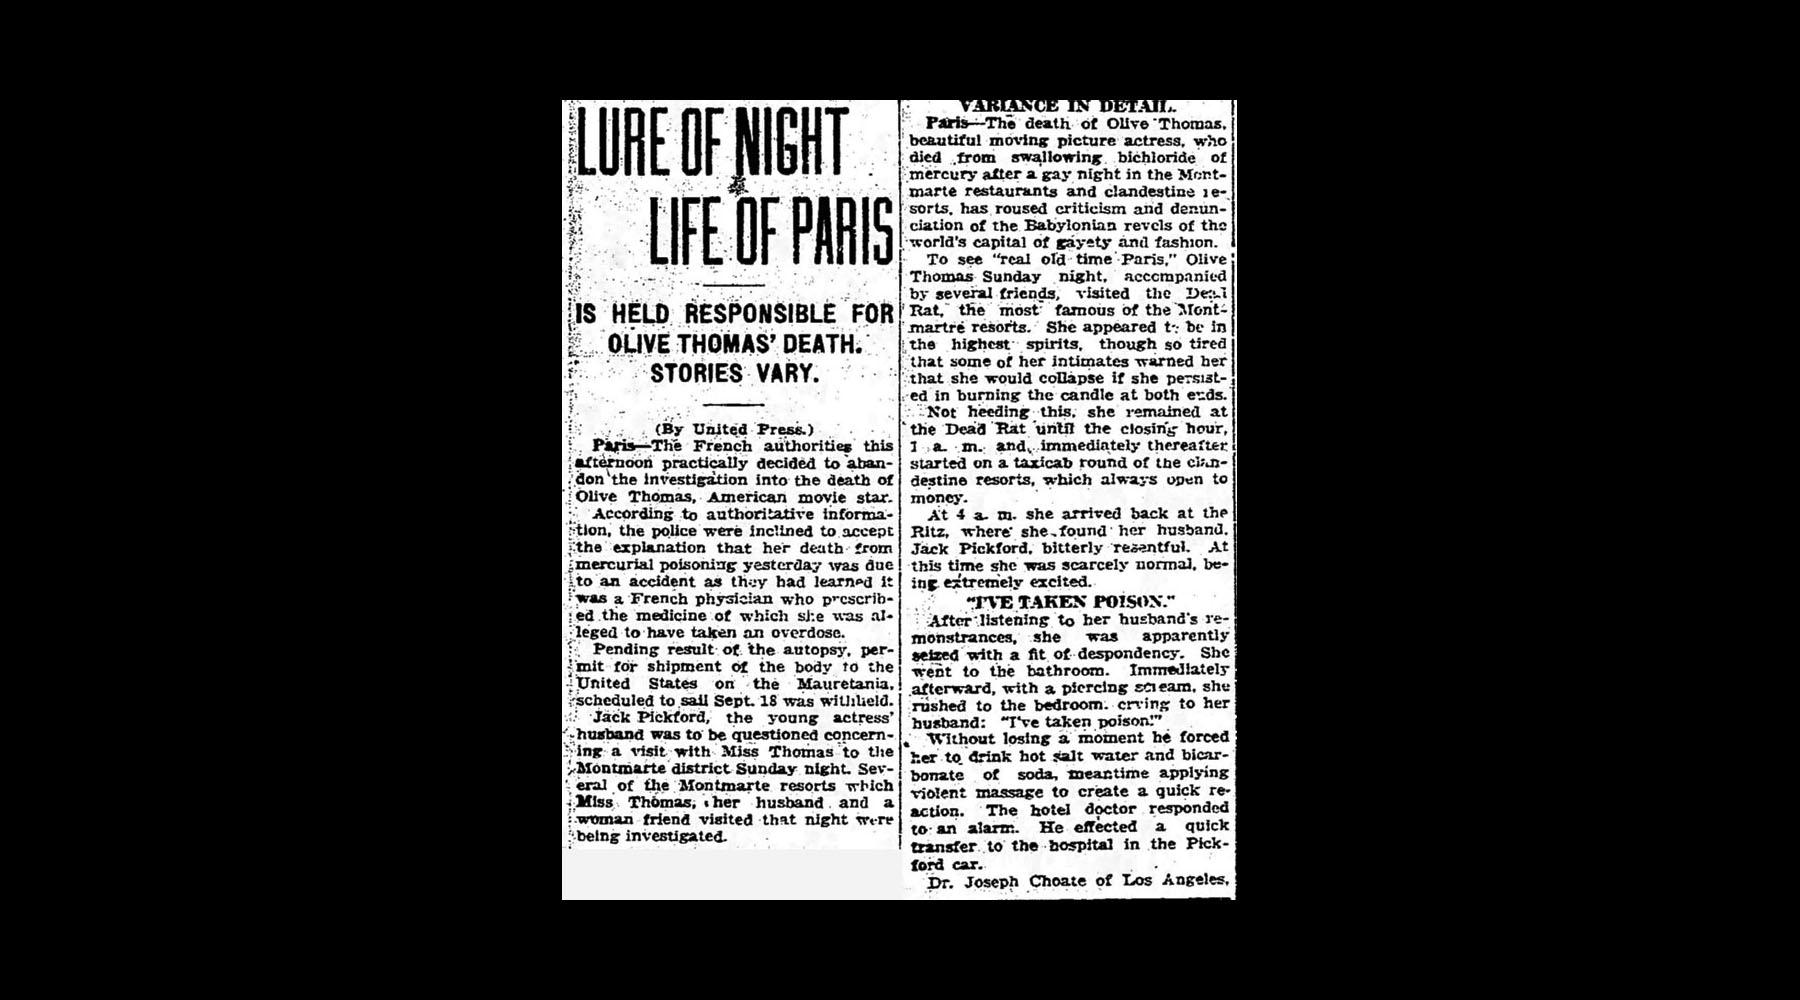 She died a few days later. The lure of Parisian nightlife was initially blamed for her death.